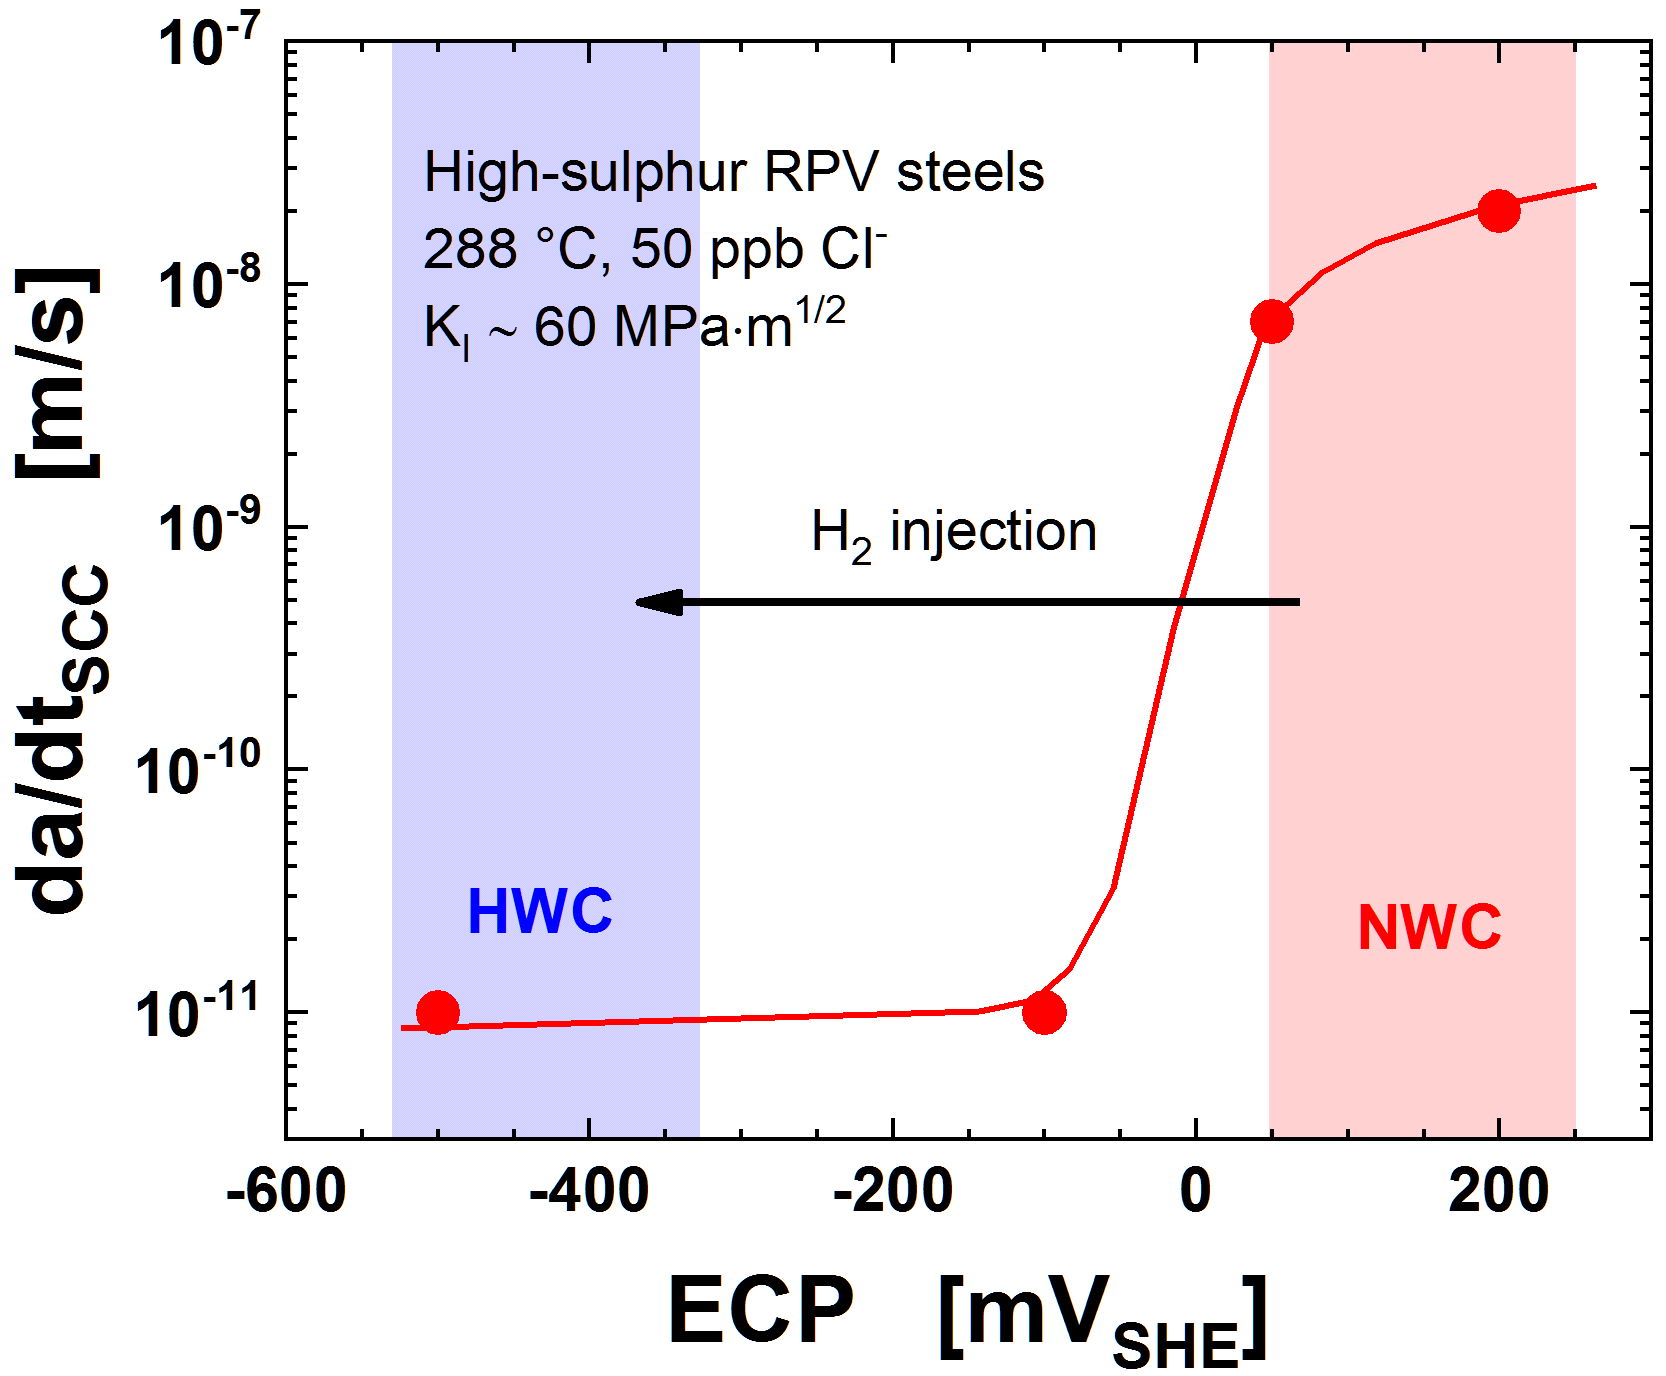 Fig. 3: Mitigation effect of HWC with hydrogen injection into the feedwater on SCC crack growth in RPV steel in case of 50 ppb chloride contamination of the reactor coolant. (© Paul Scherrer Institut)